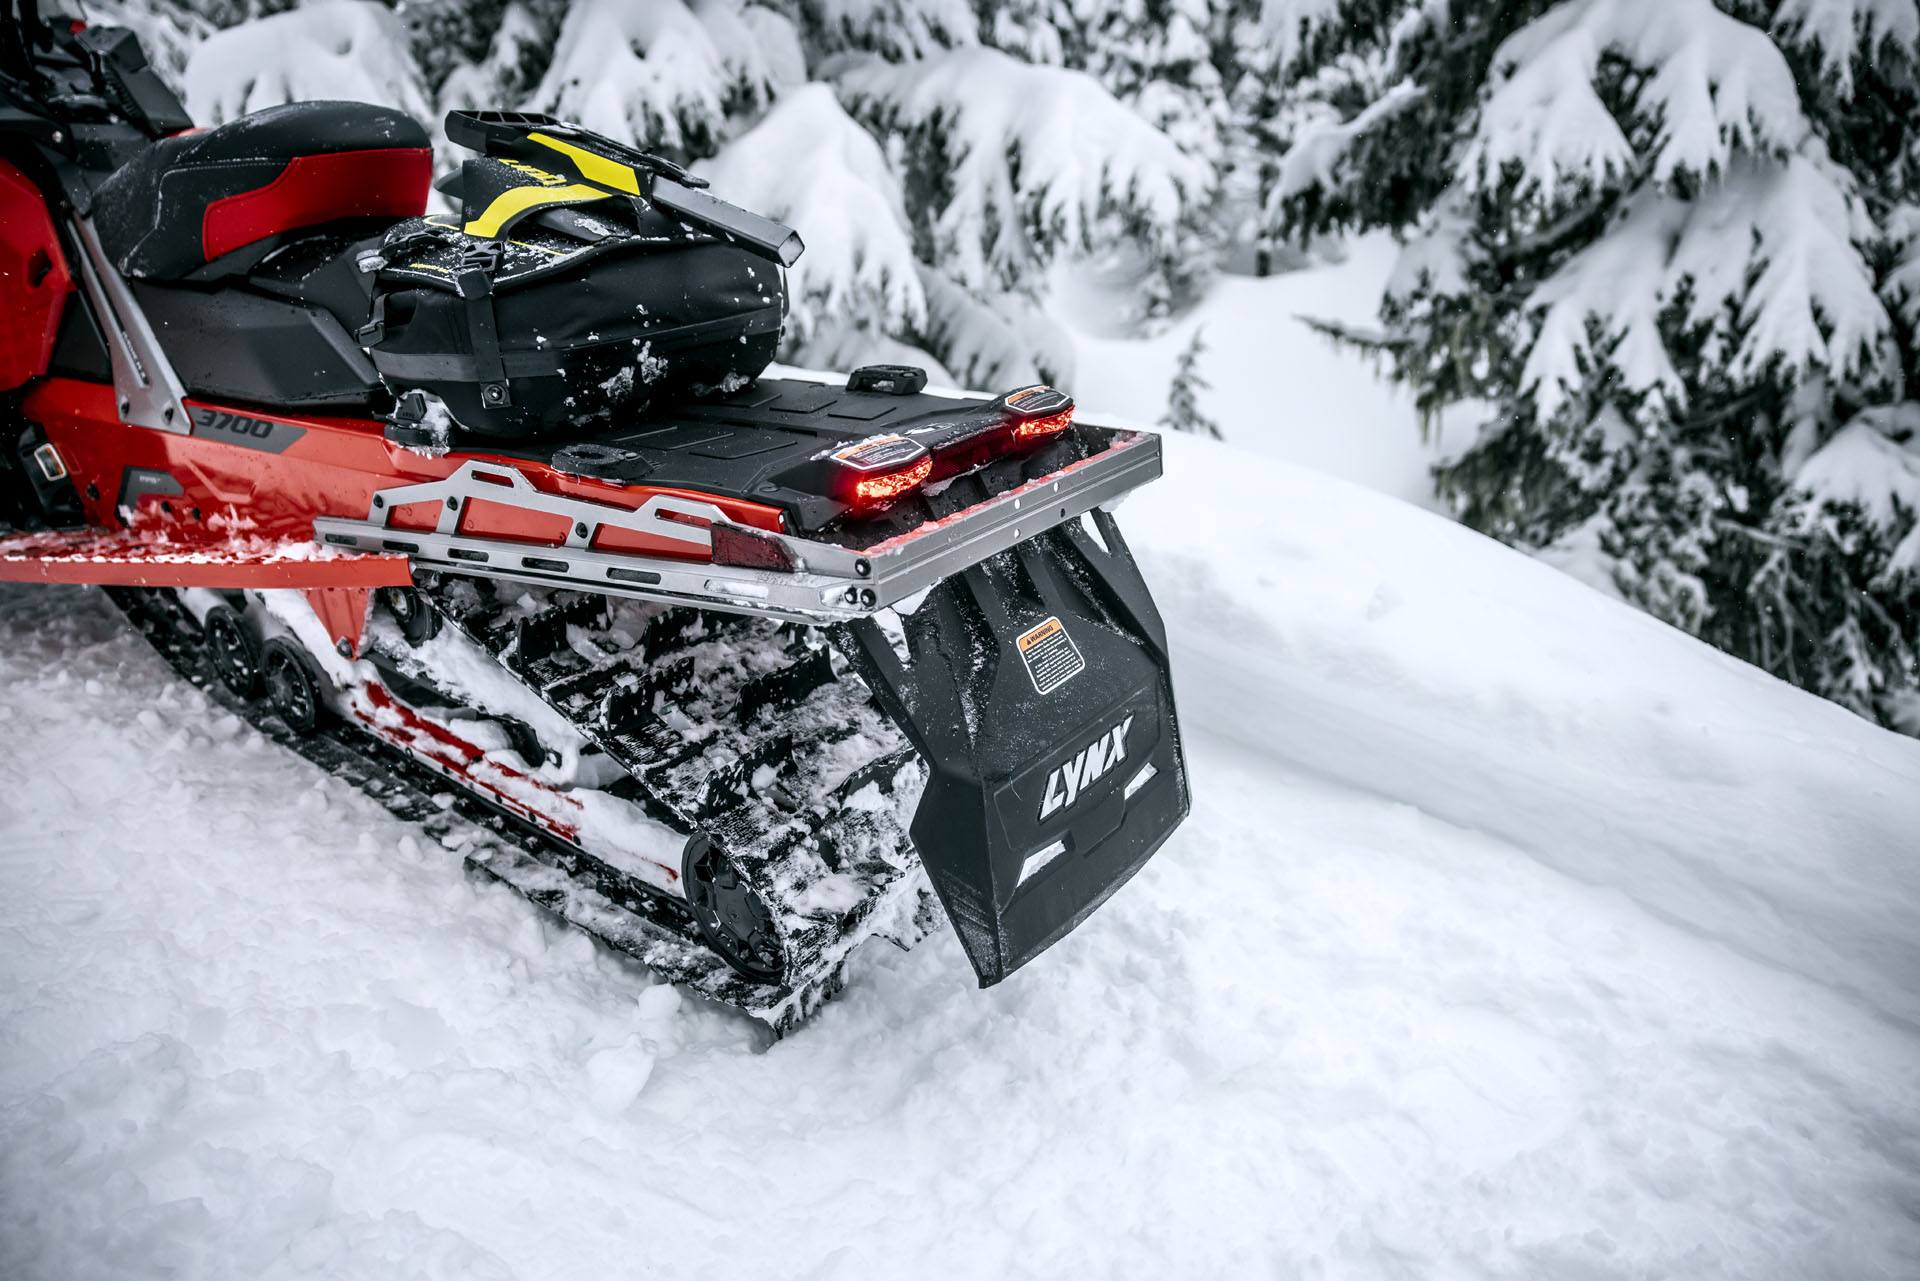 2023 LYNX Xterrain RE 900 ACE Turbo R PowderMax 2.0 E.S. in Cohoes, New York